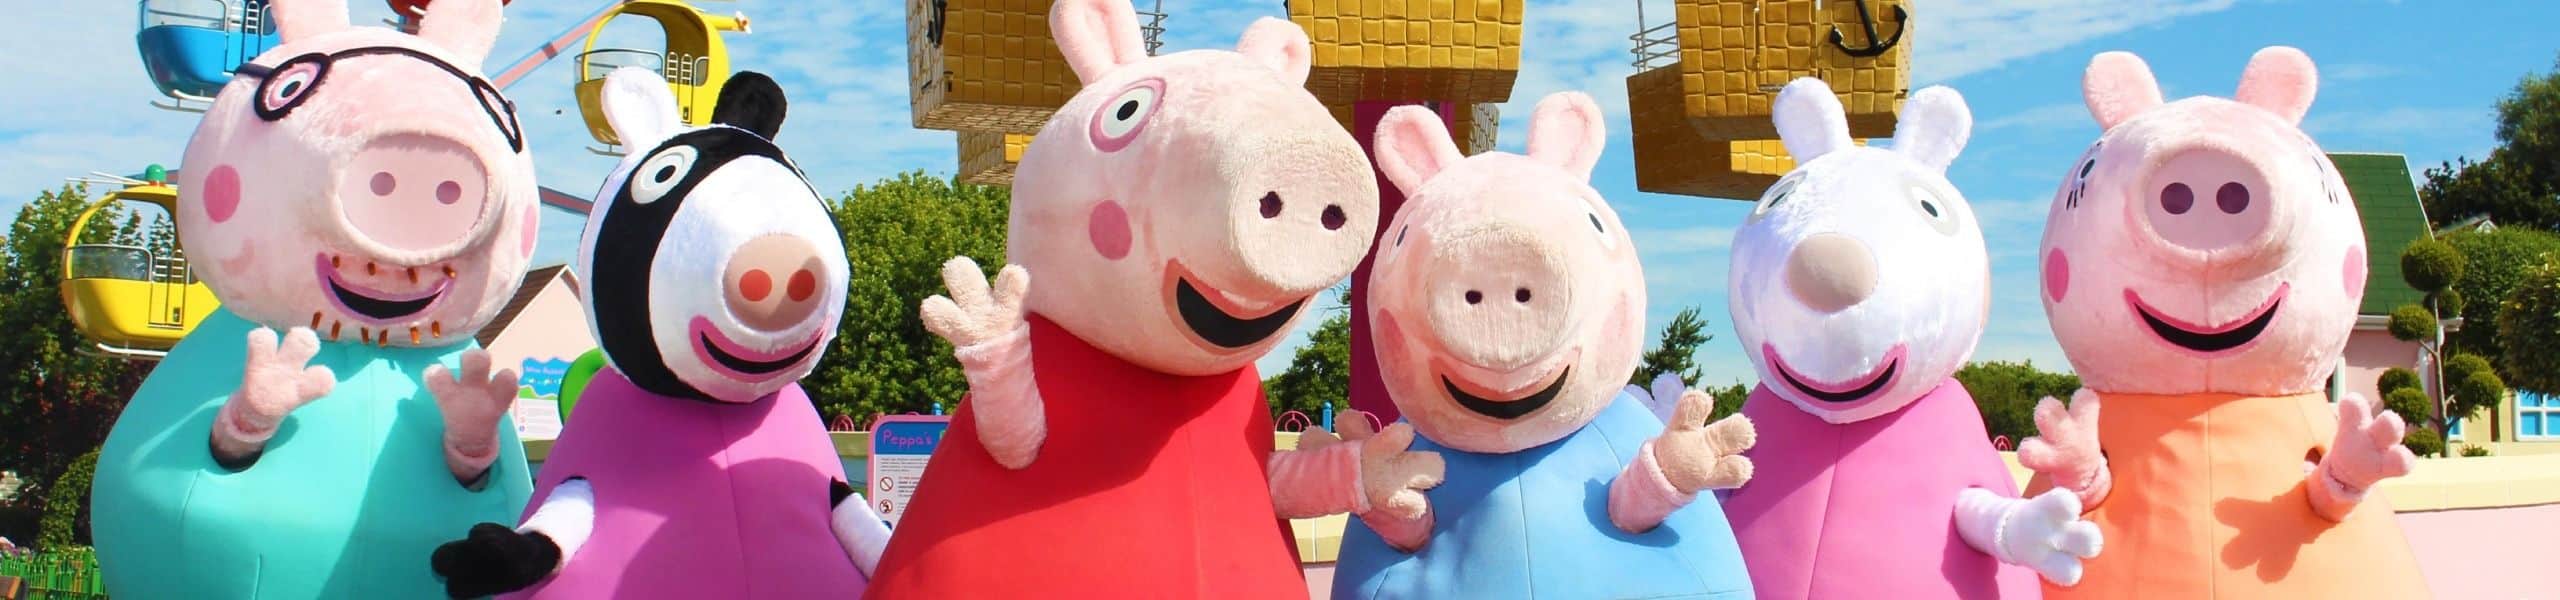 Meet Peppa Pig, Friends and Family This Easter!